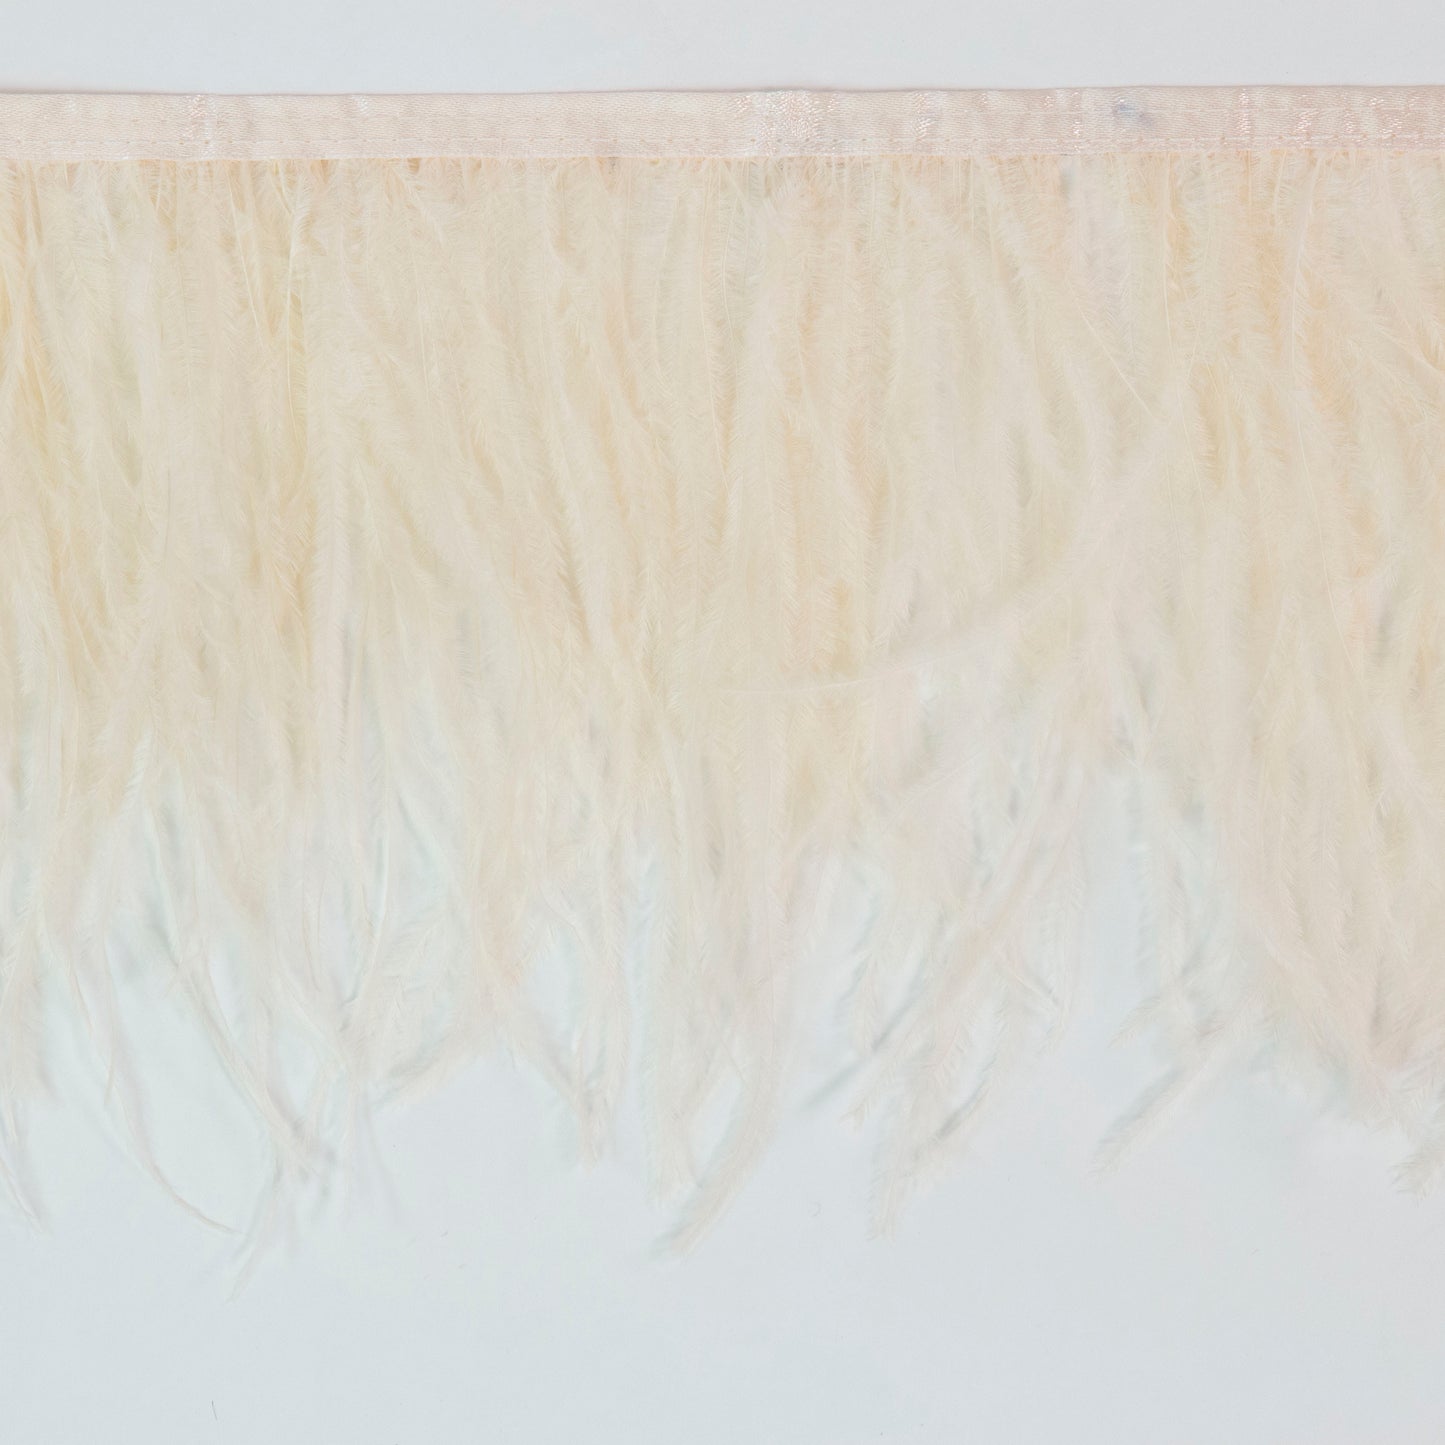 Ostrich Feather Fringe 2PLY - Ivory